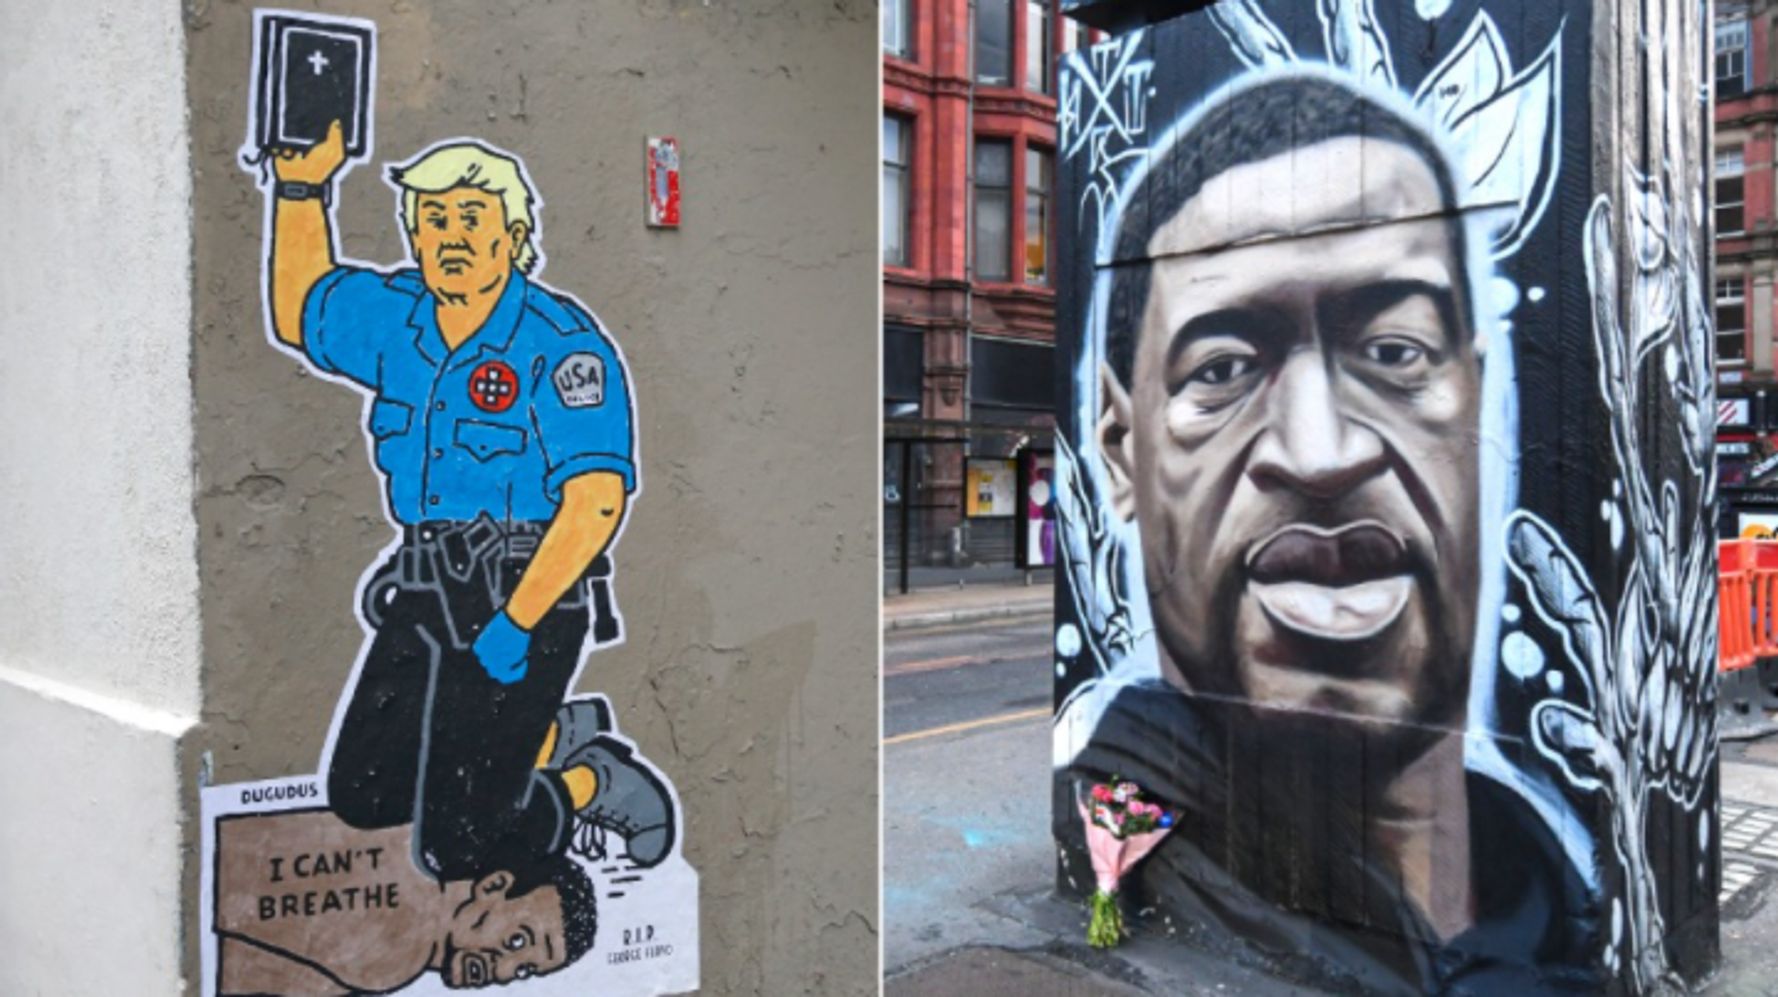 Street Art Takes A Stand Against Racism In Solidarity With Black Lives